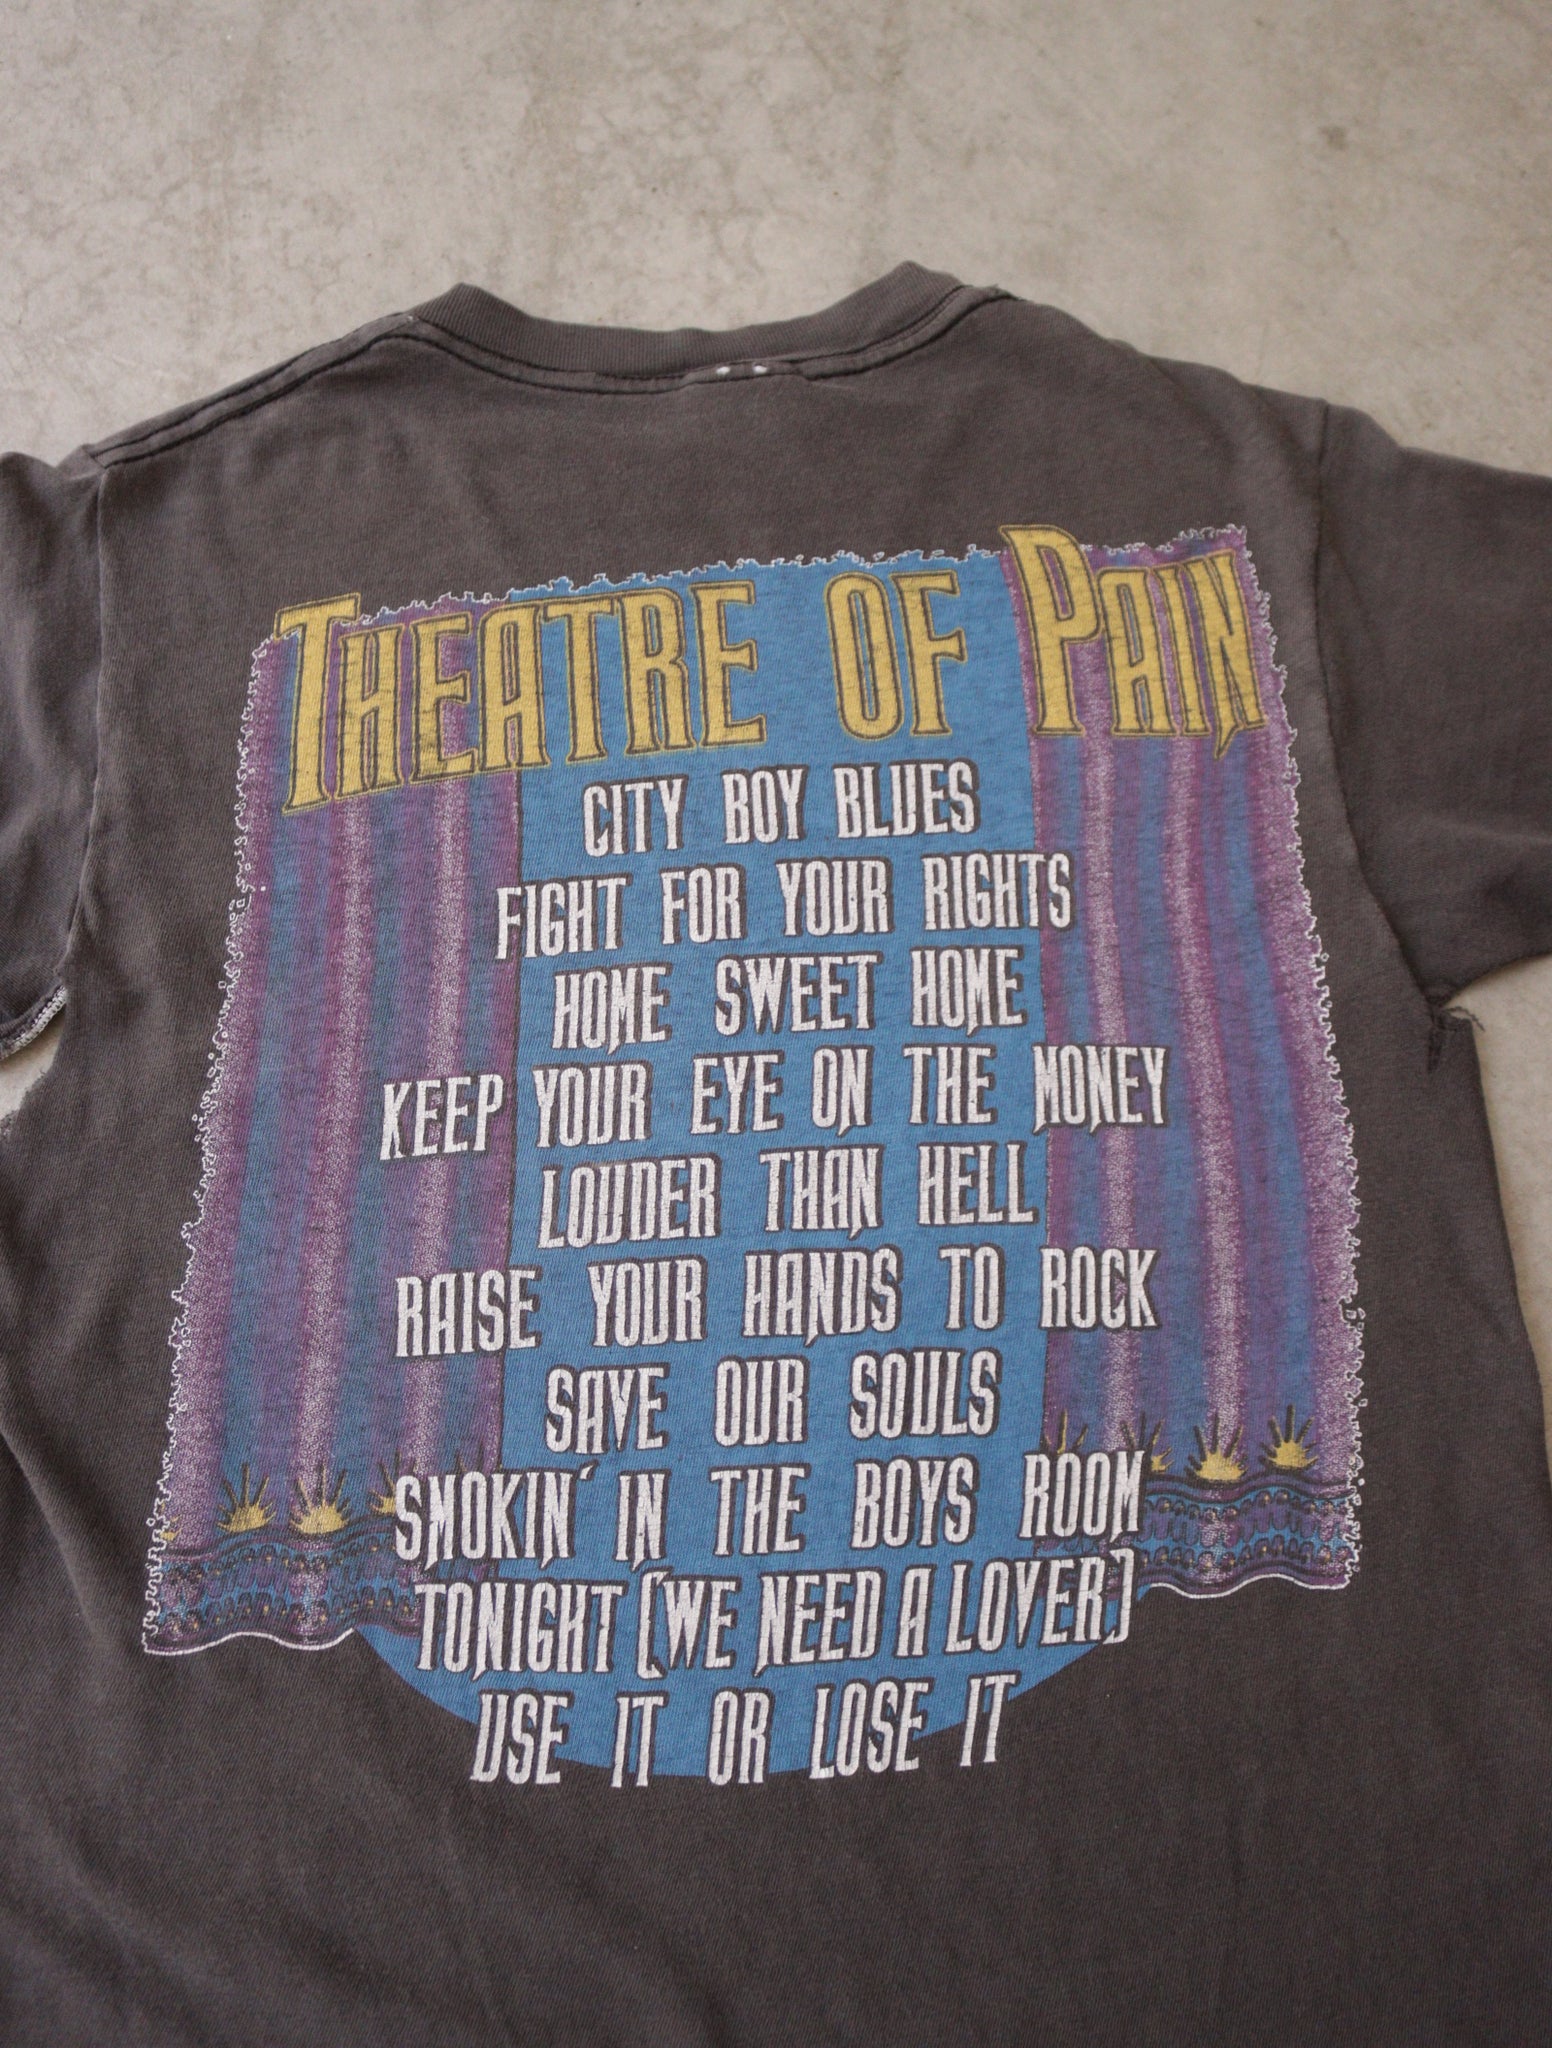 1985 MOTLEY CRUE THEATRE OF PAIN DISTRESSED BAND TEE